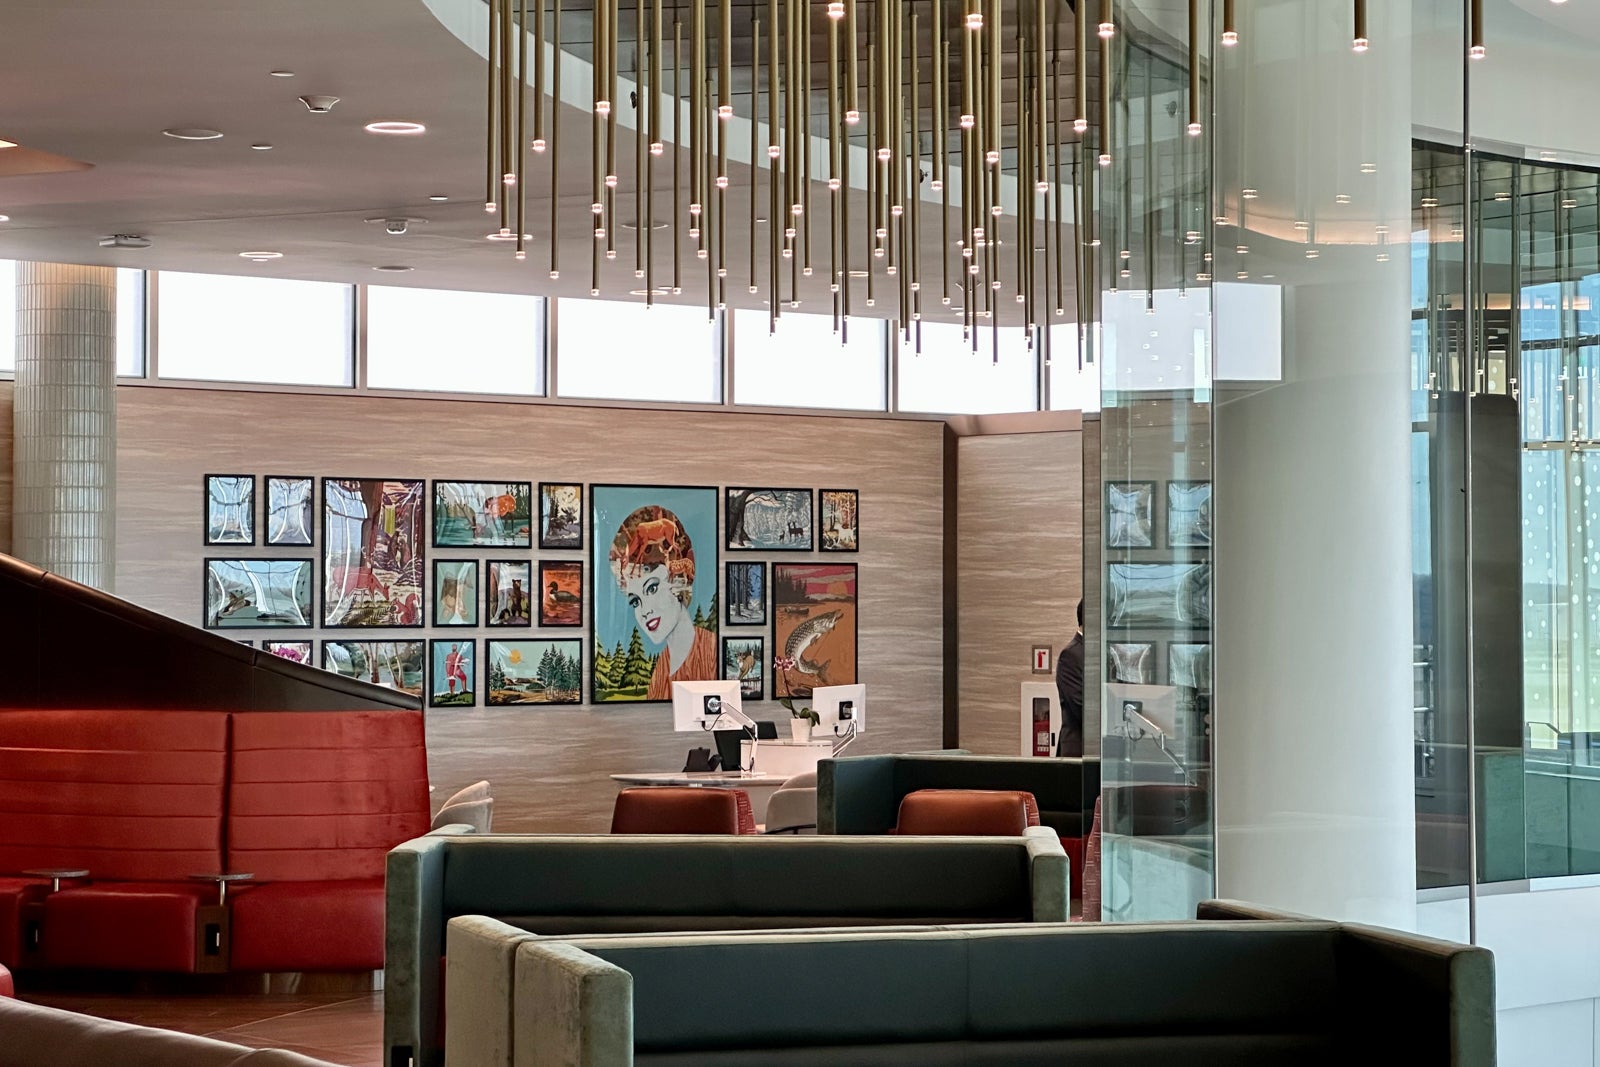 A First Look at the New Delta Sky Club Lounge in Minneapolis - AFAR